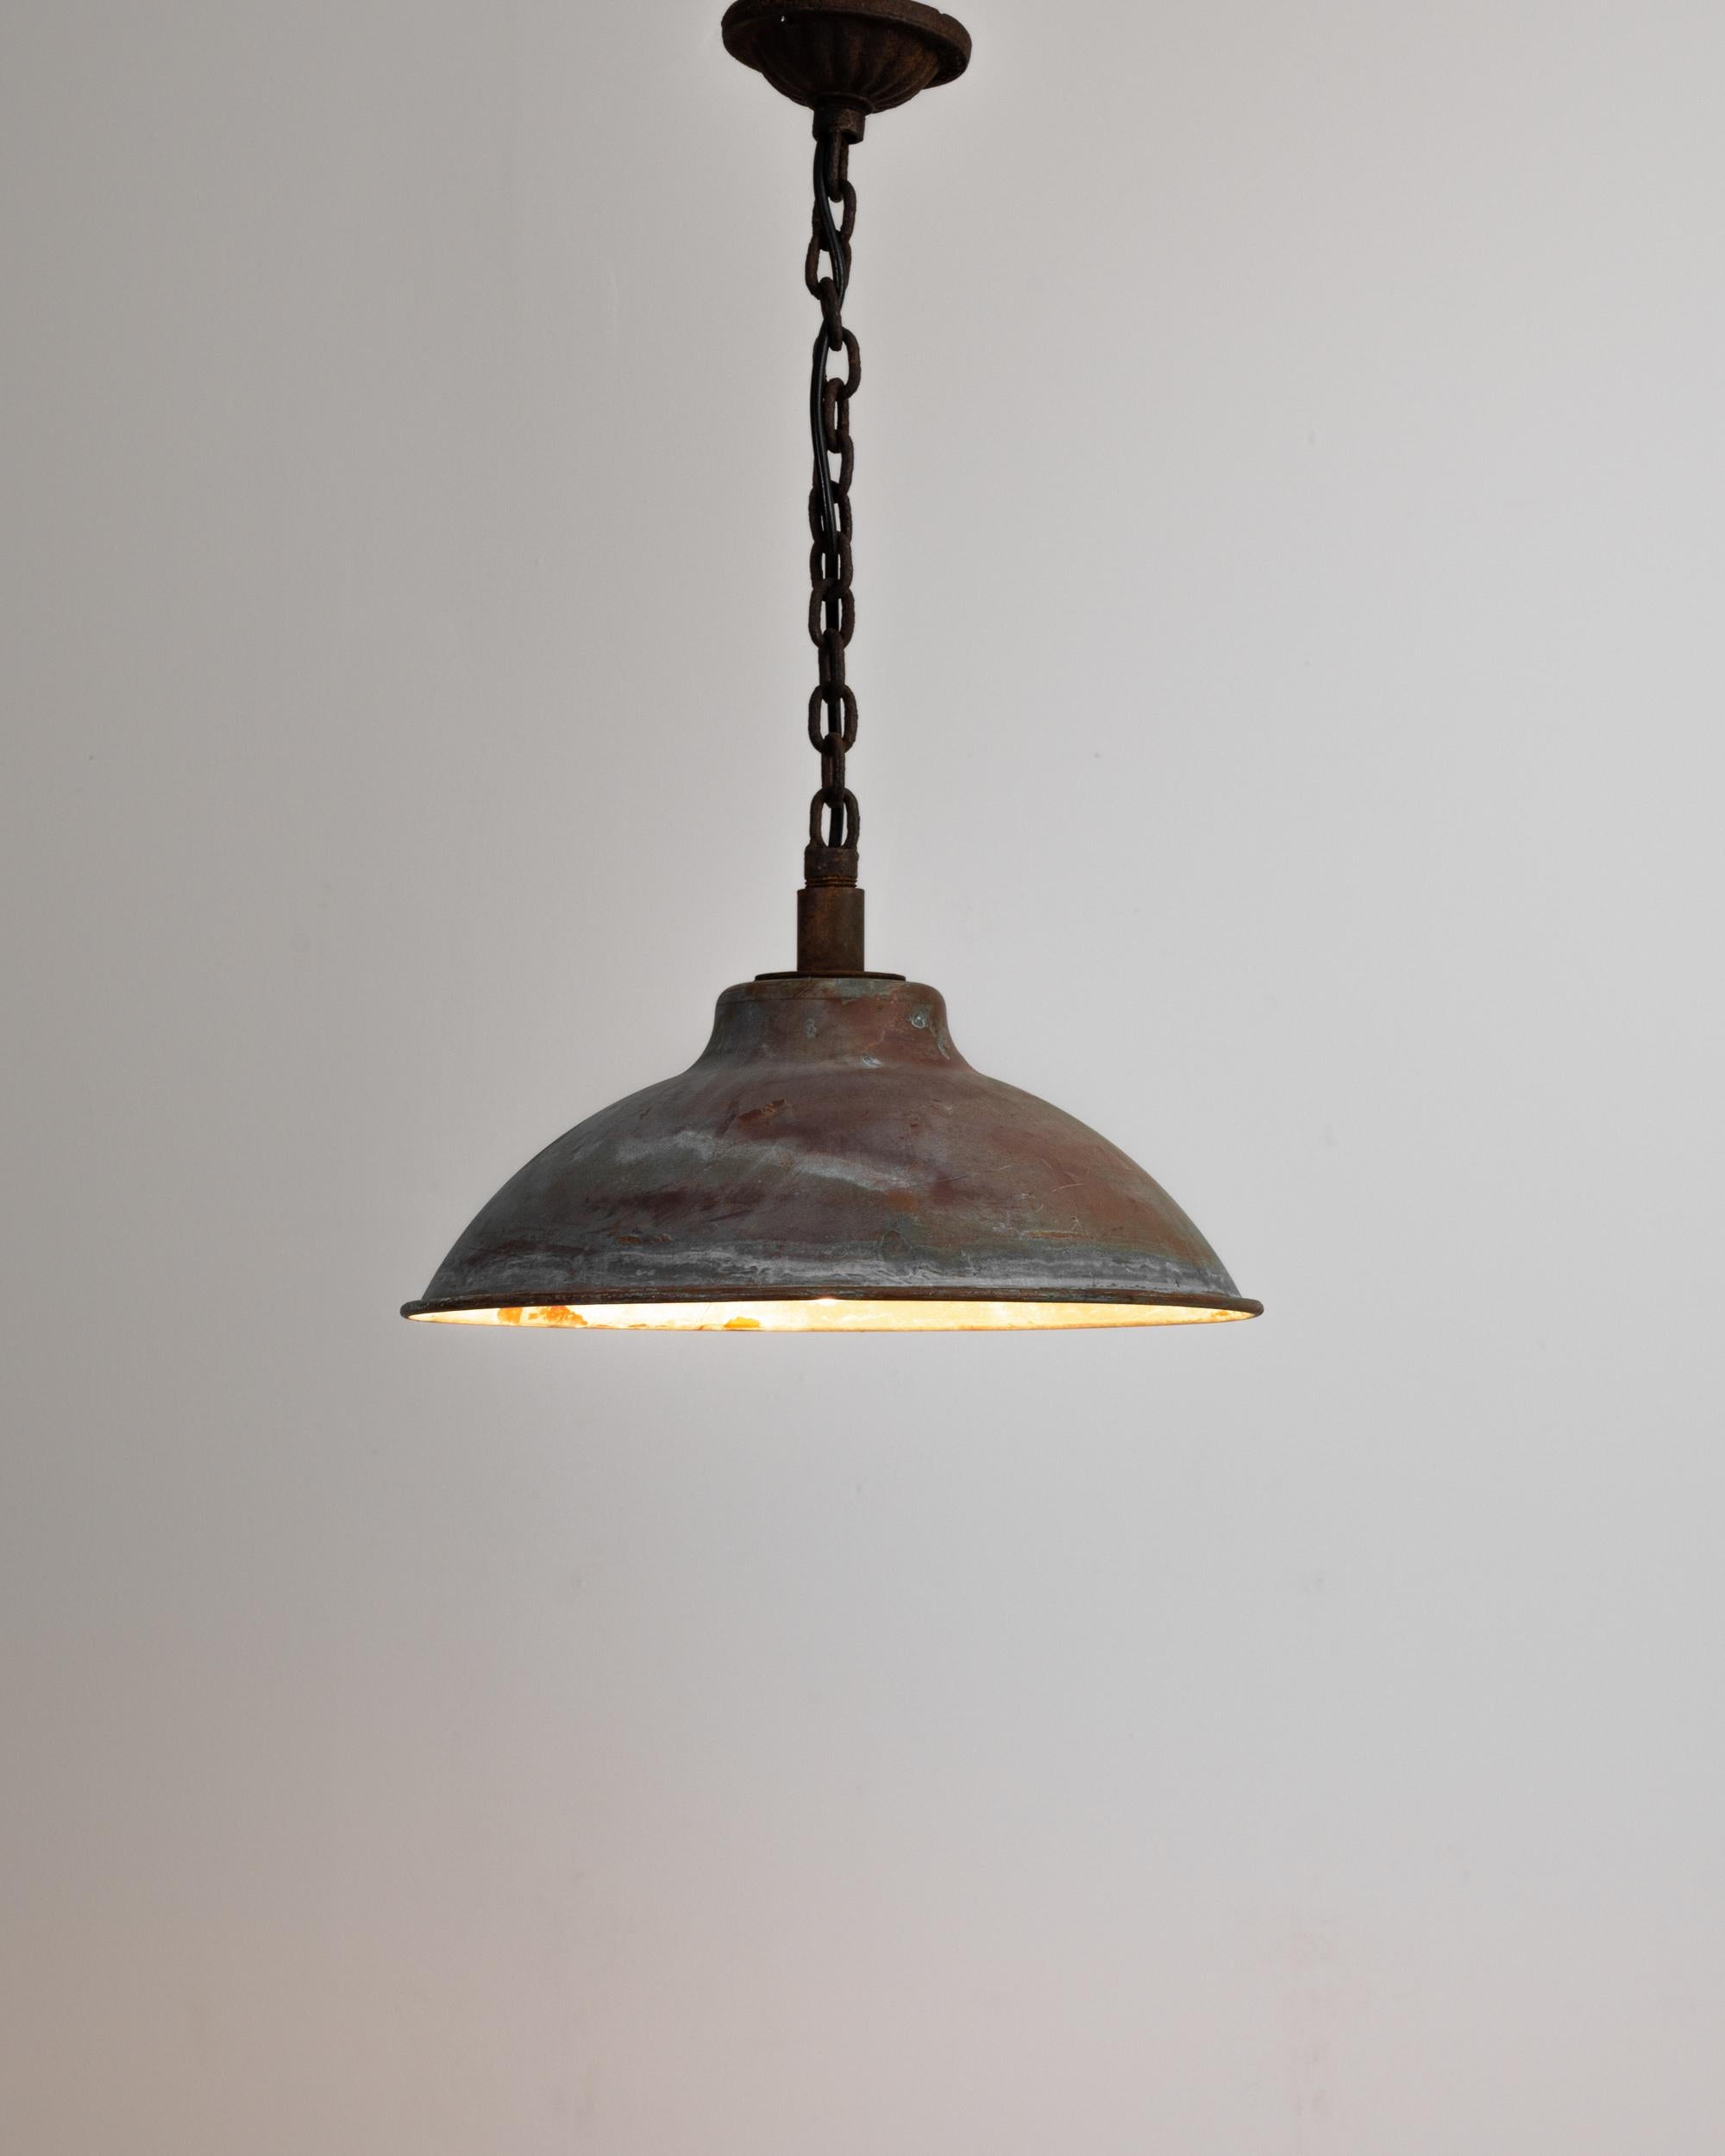 A copper plated industrial lamp from Central Europe, produced during the 20th Century. After descending two feet from the ceiling down an iron chain and canopy, colors whorl across the face of this lamp like storms across Jupiter. Shining bright,